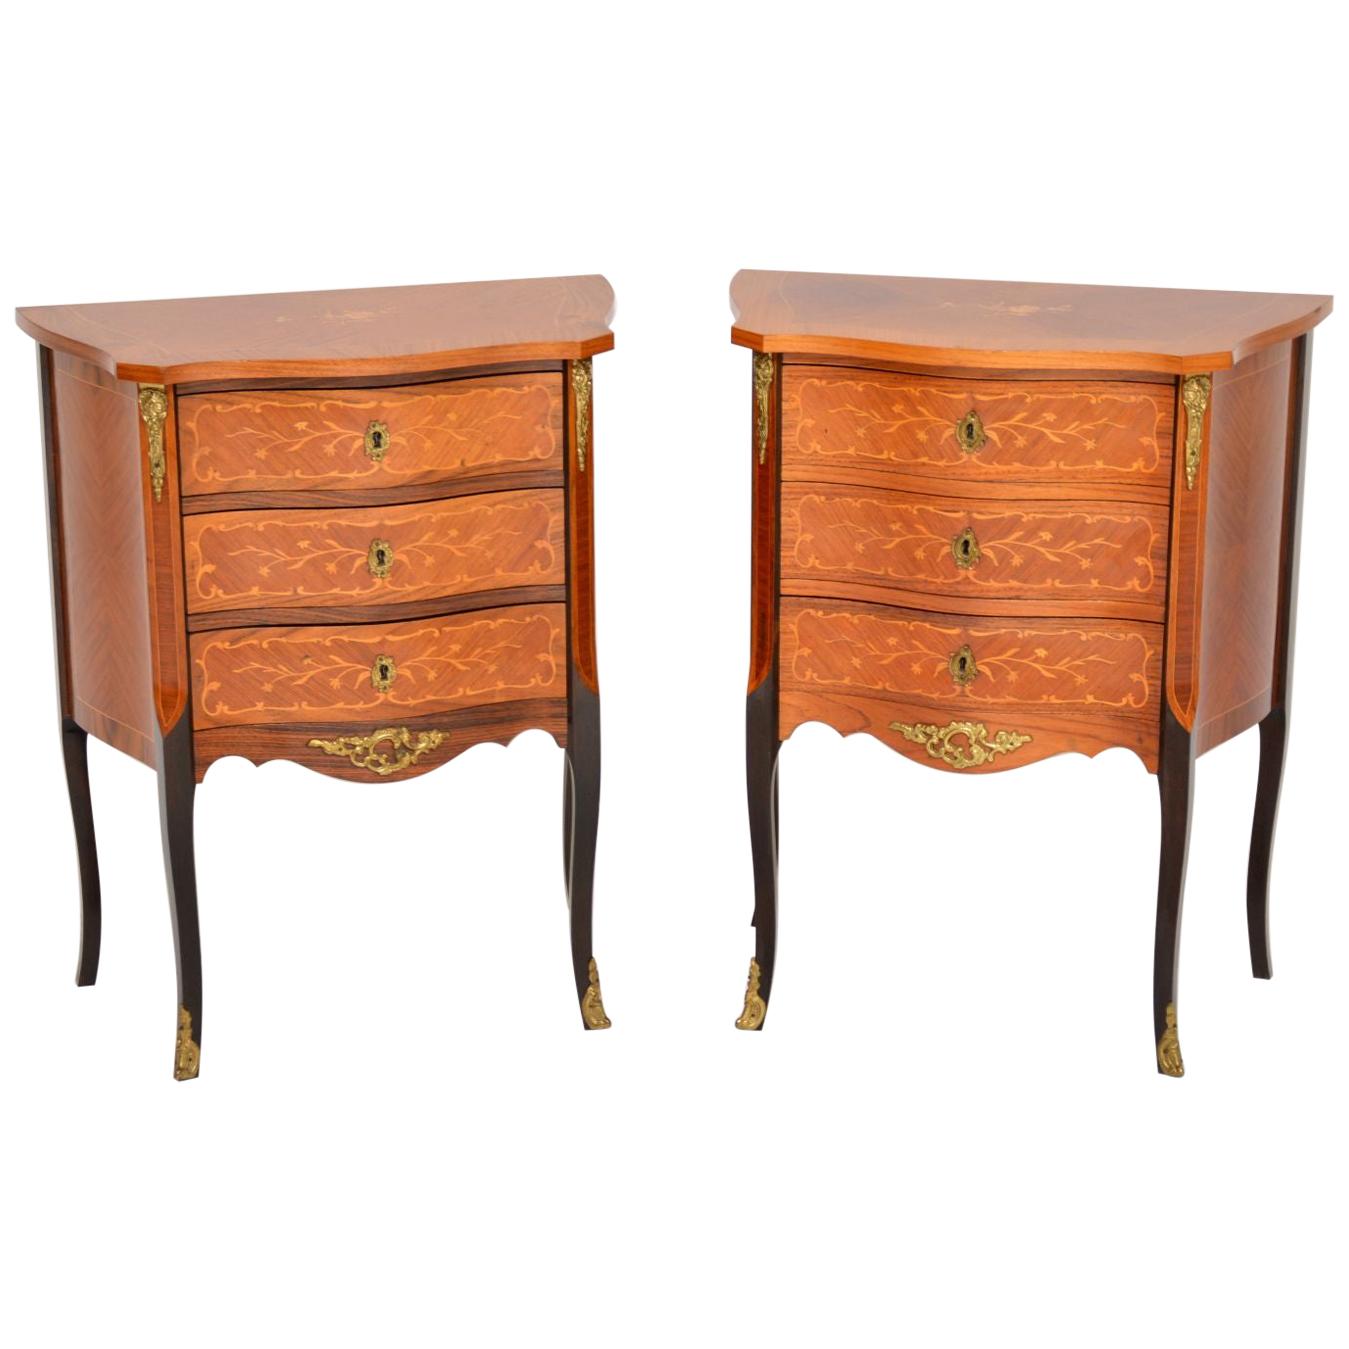 Pair of Antique French Inlaid Kingwood Chests